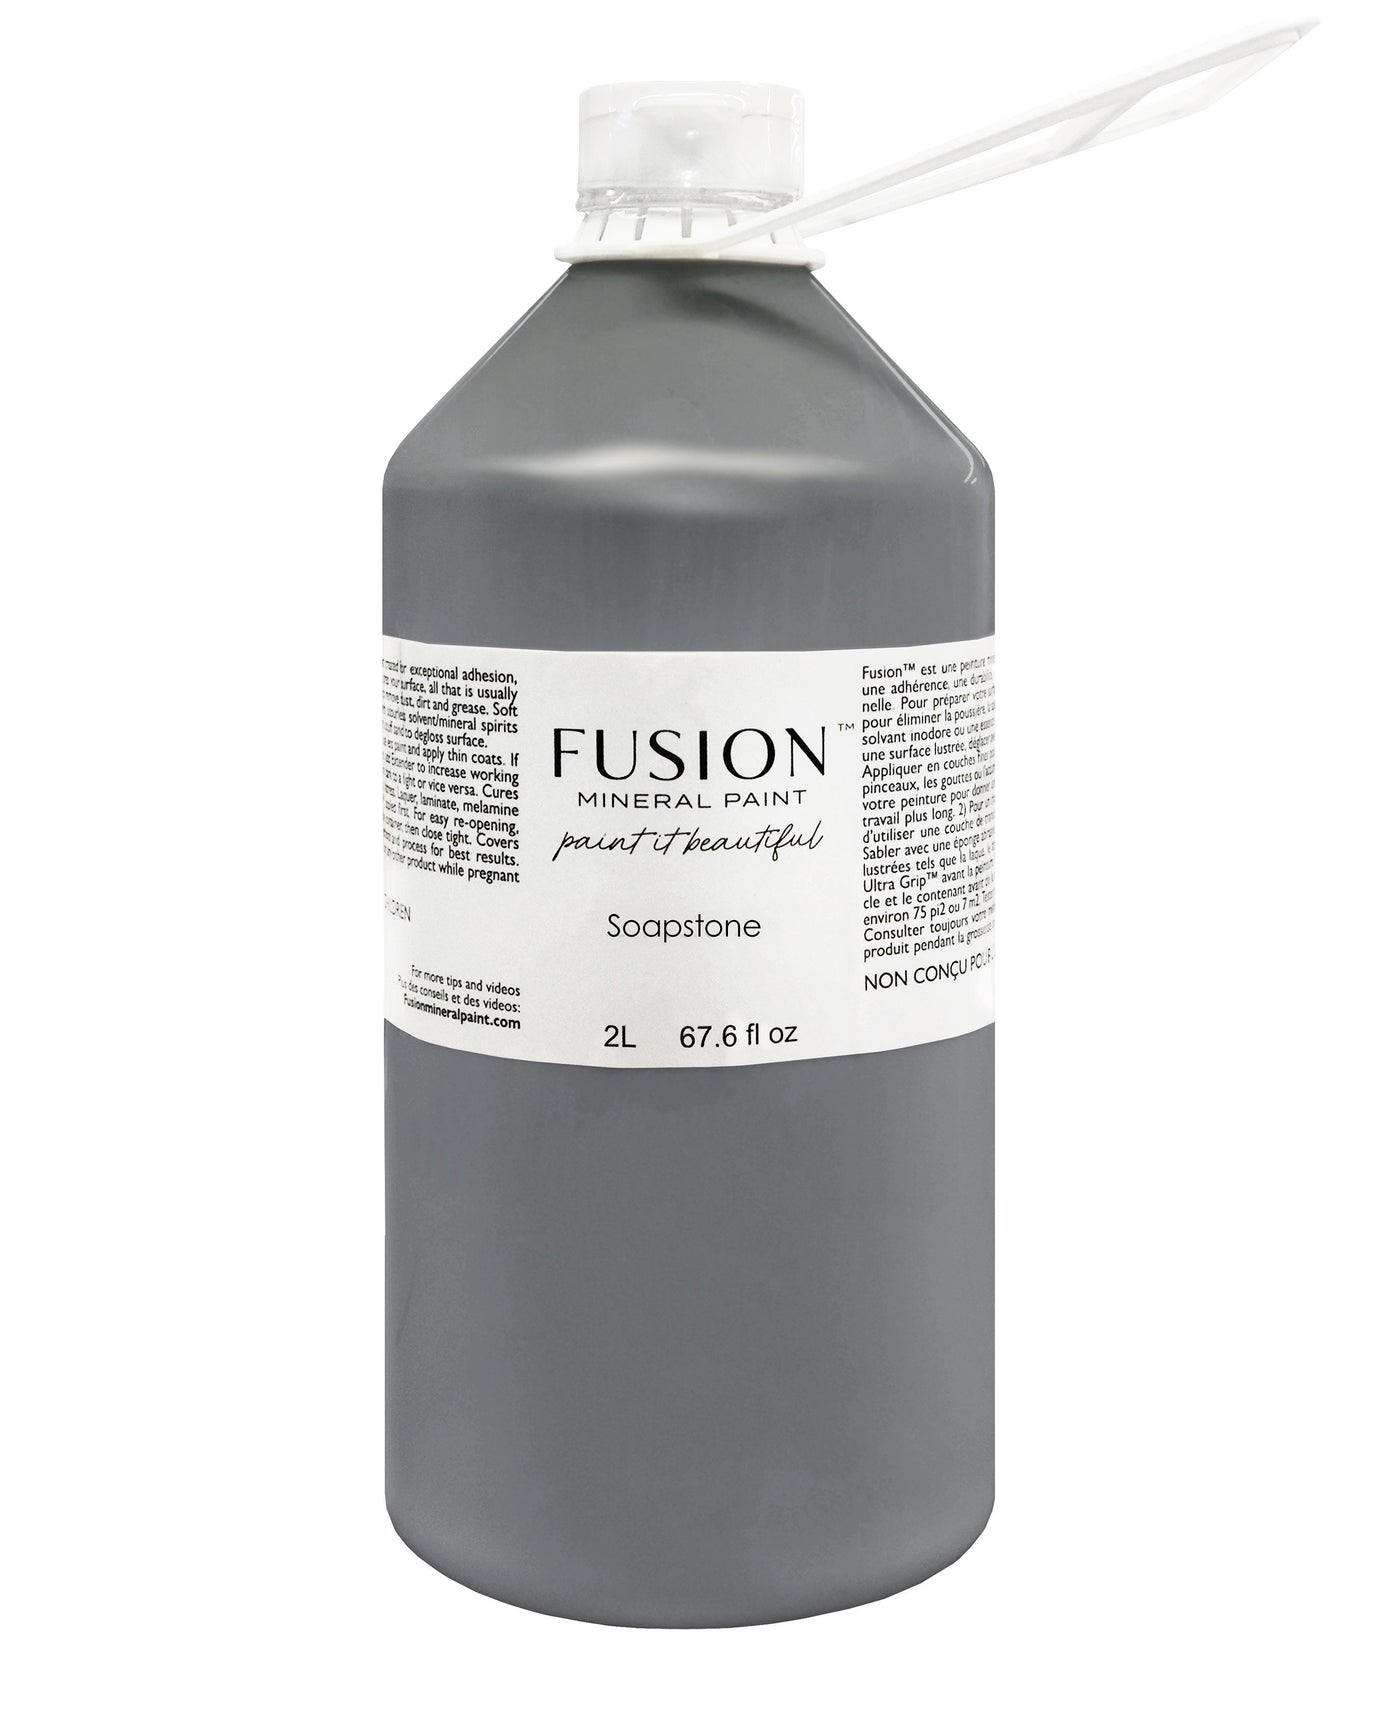 Deep grey 2L container from Fusion Mineral Paint